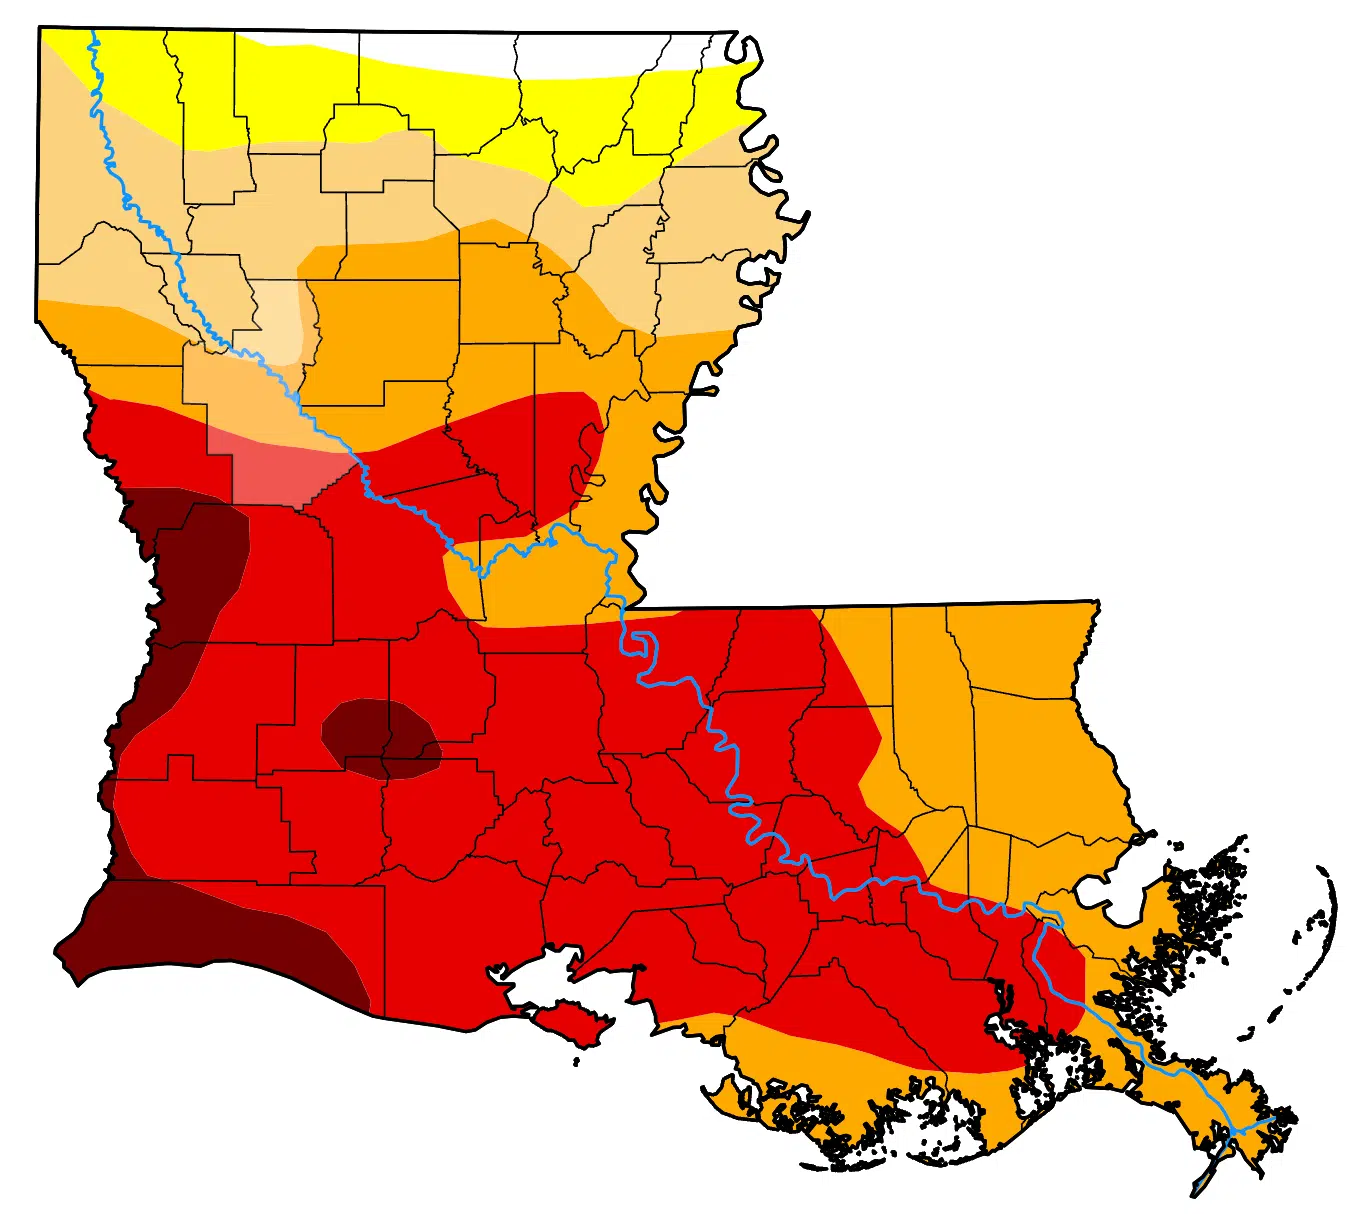 Most of Louisiana is in "extreme" or "severe" drought